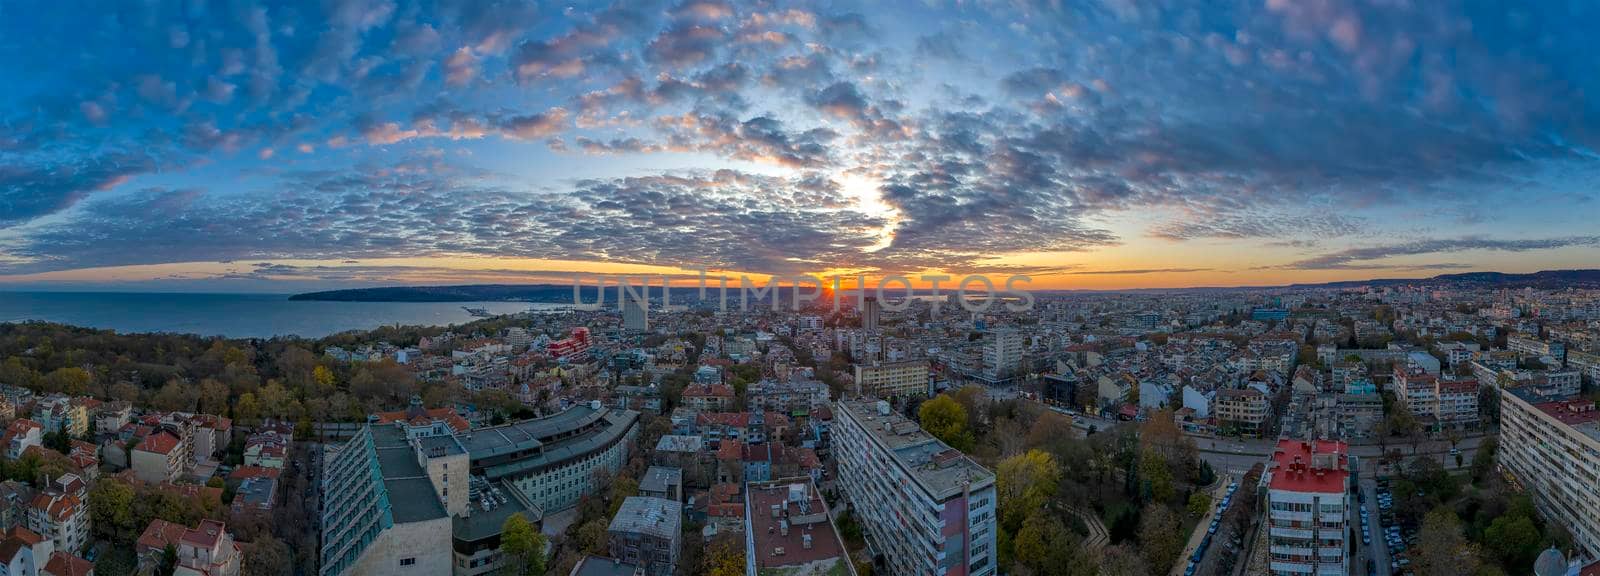 Amazing aerial panoramic view of sunset over the city Varna, Bulgaria.  by EdVal